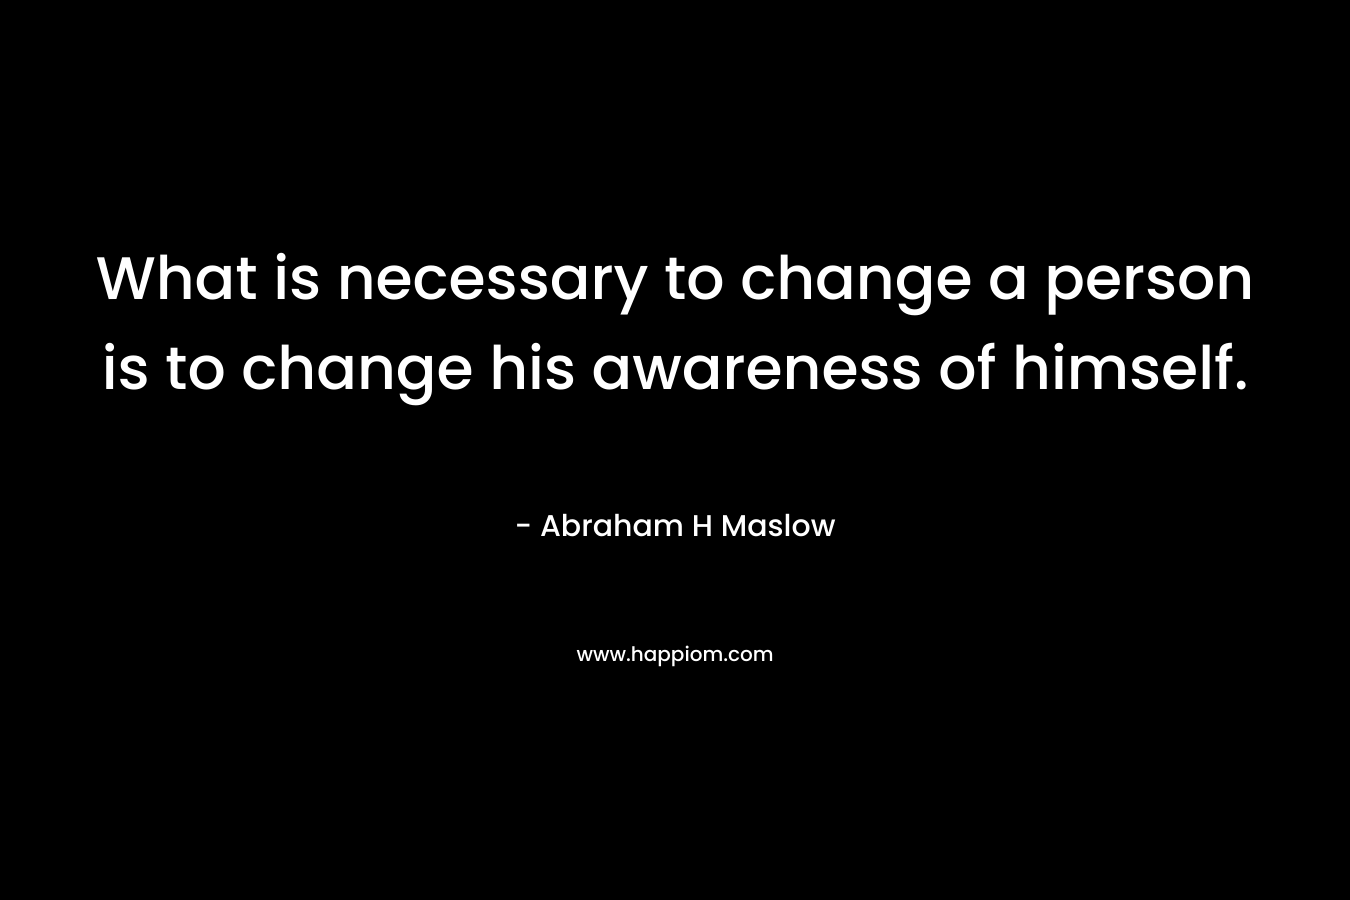 What is necessary to change a person is to change his awareness of himself.